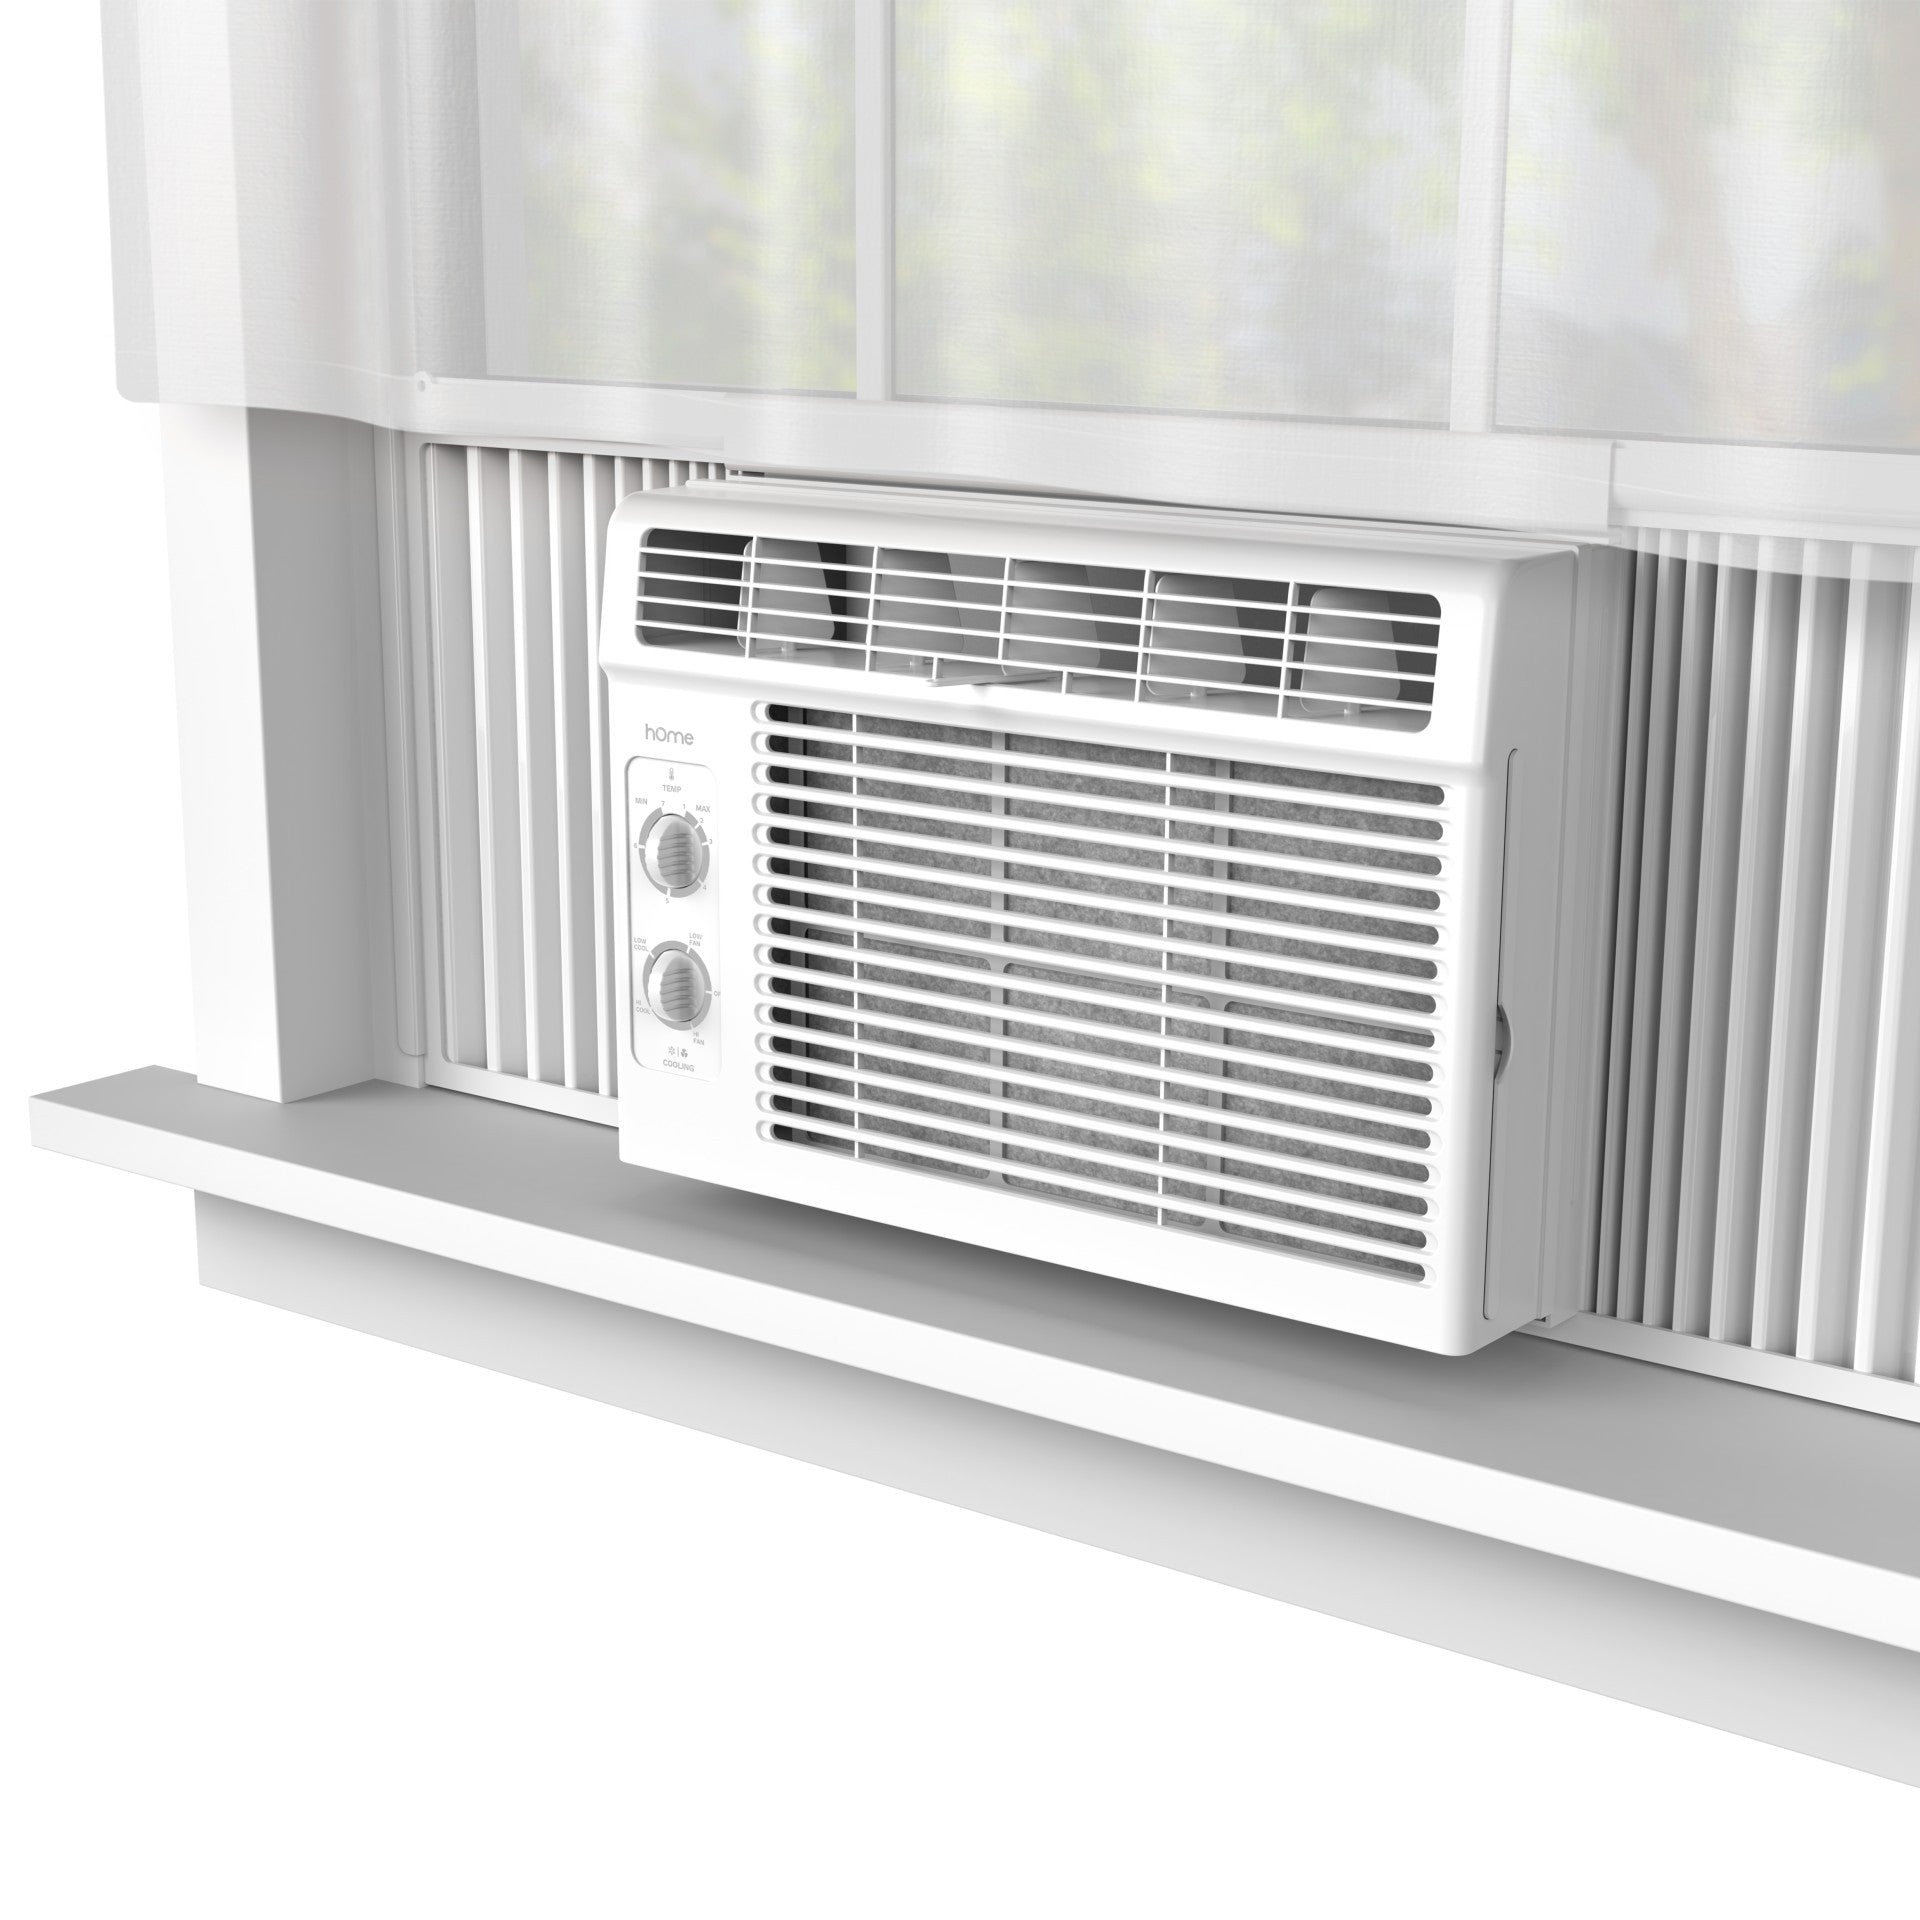 Fits well window air conditioner